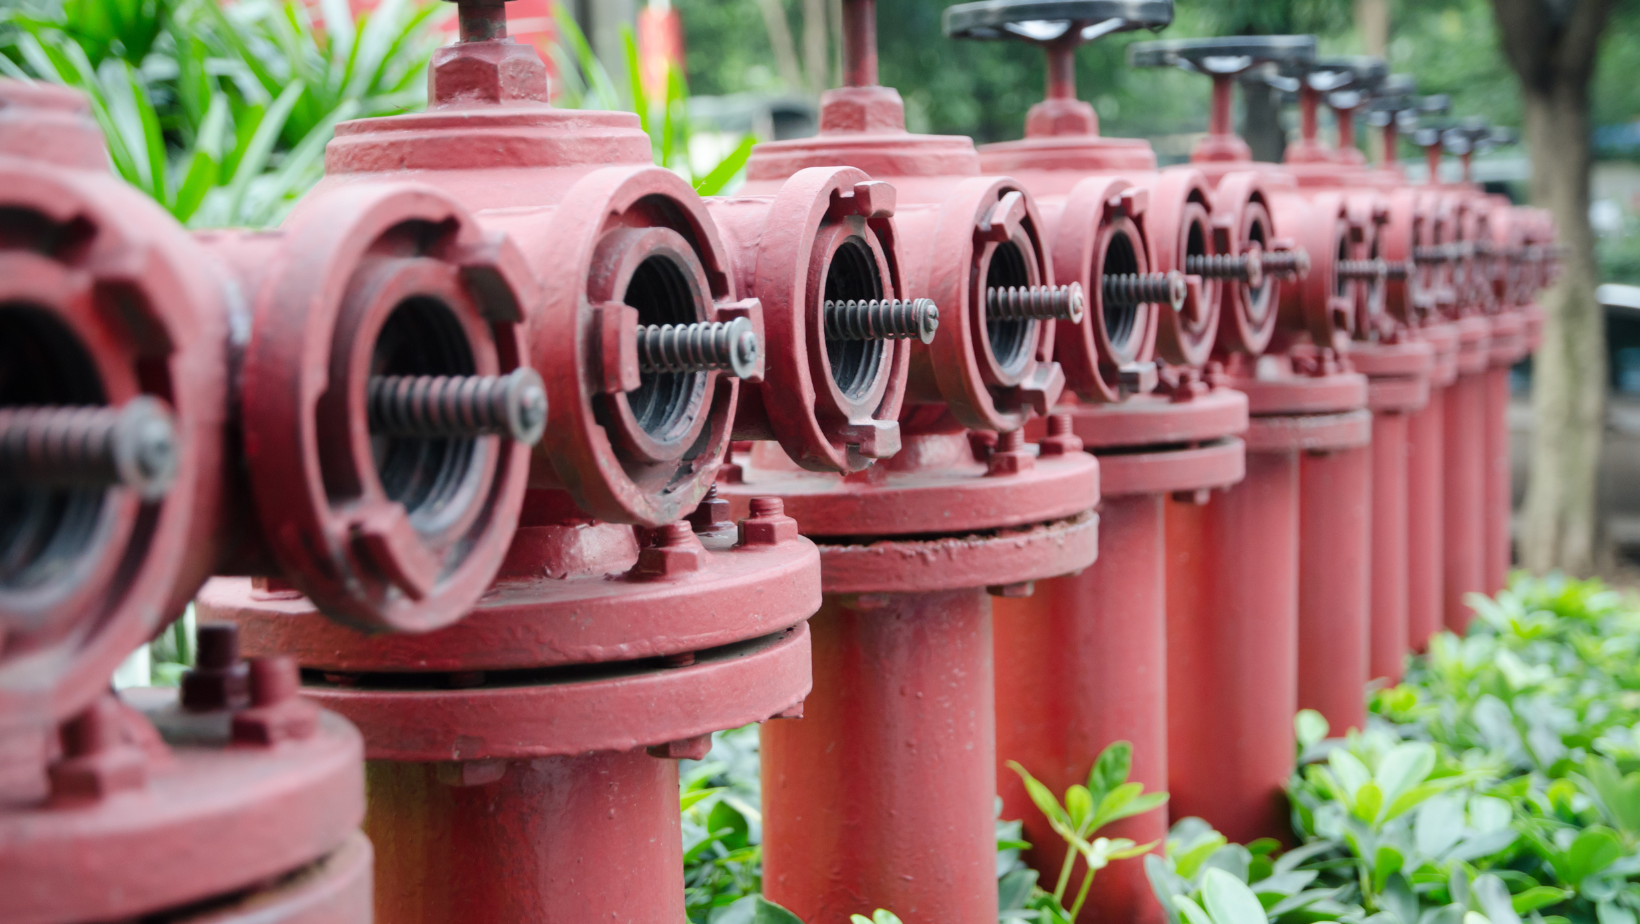 Factors to consider when performing backflow preventer inspection